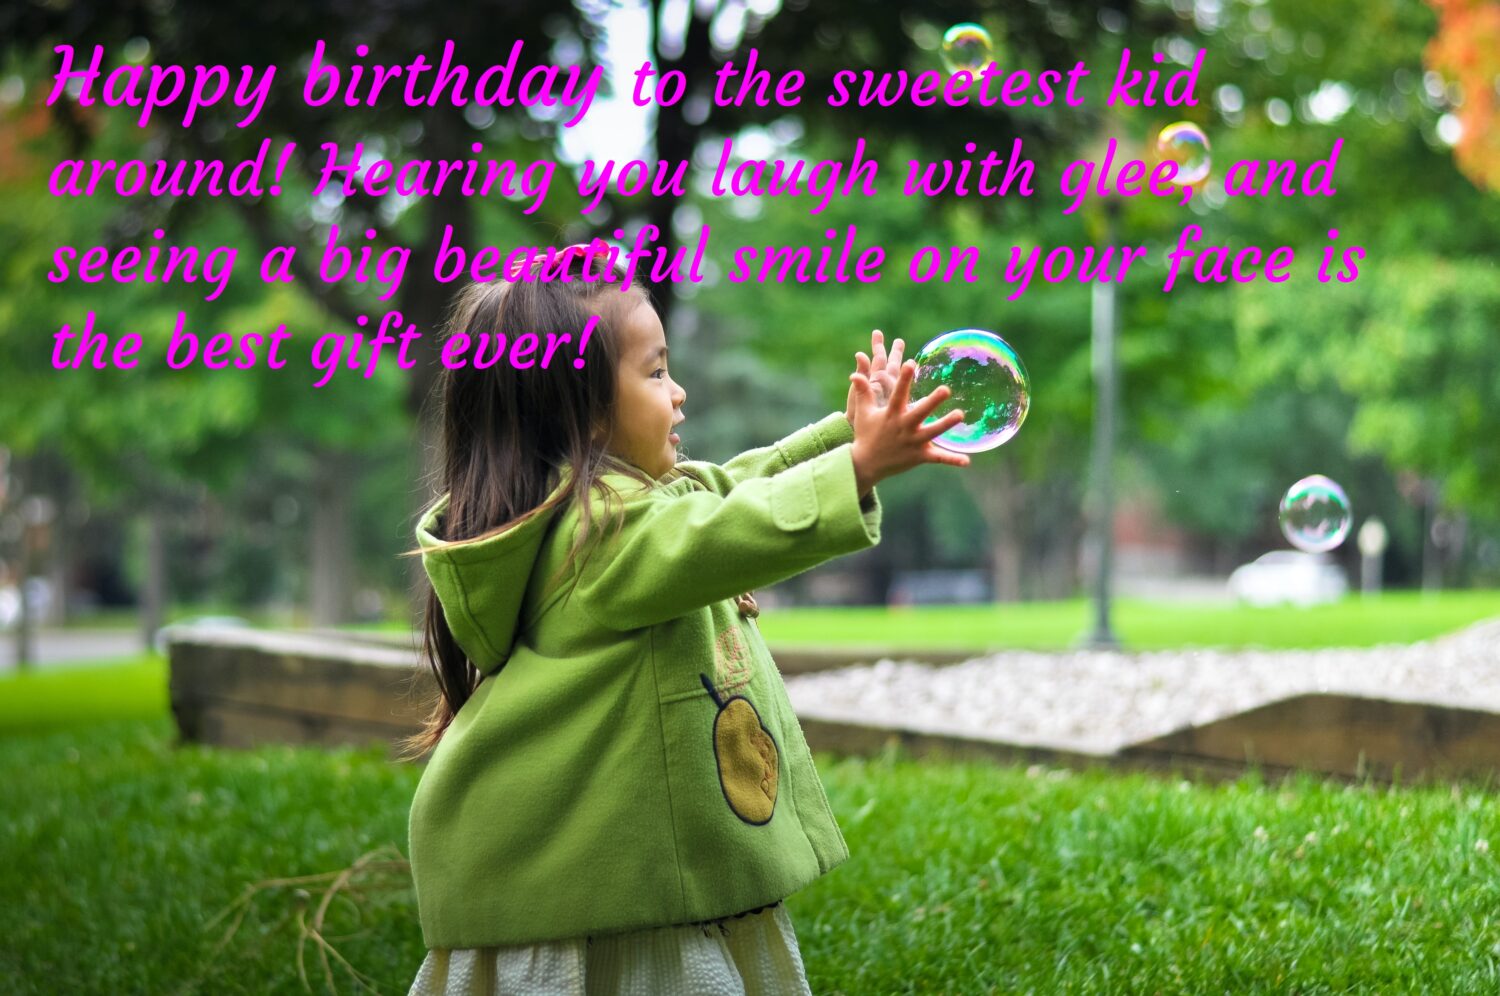 Cute girl playing with bubbles, Kids birthday wishes